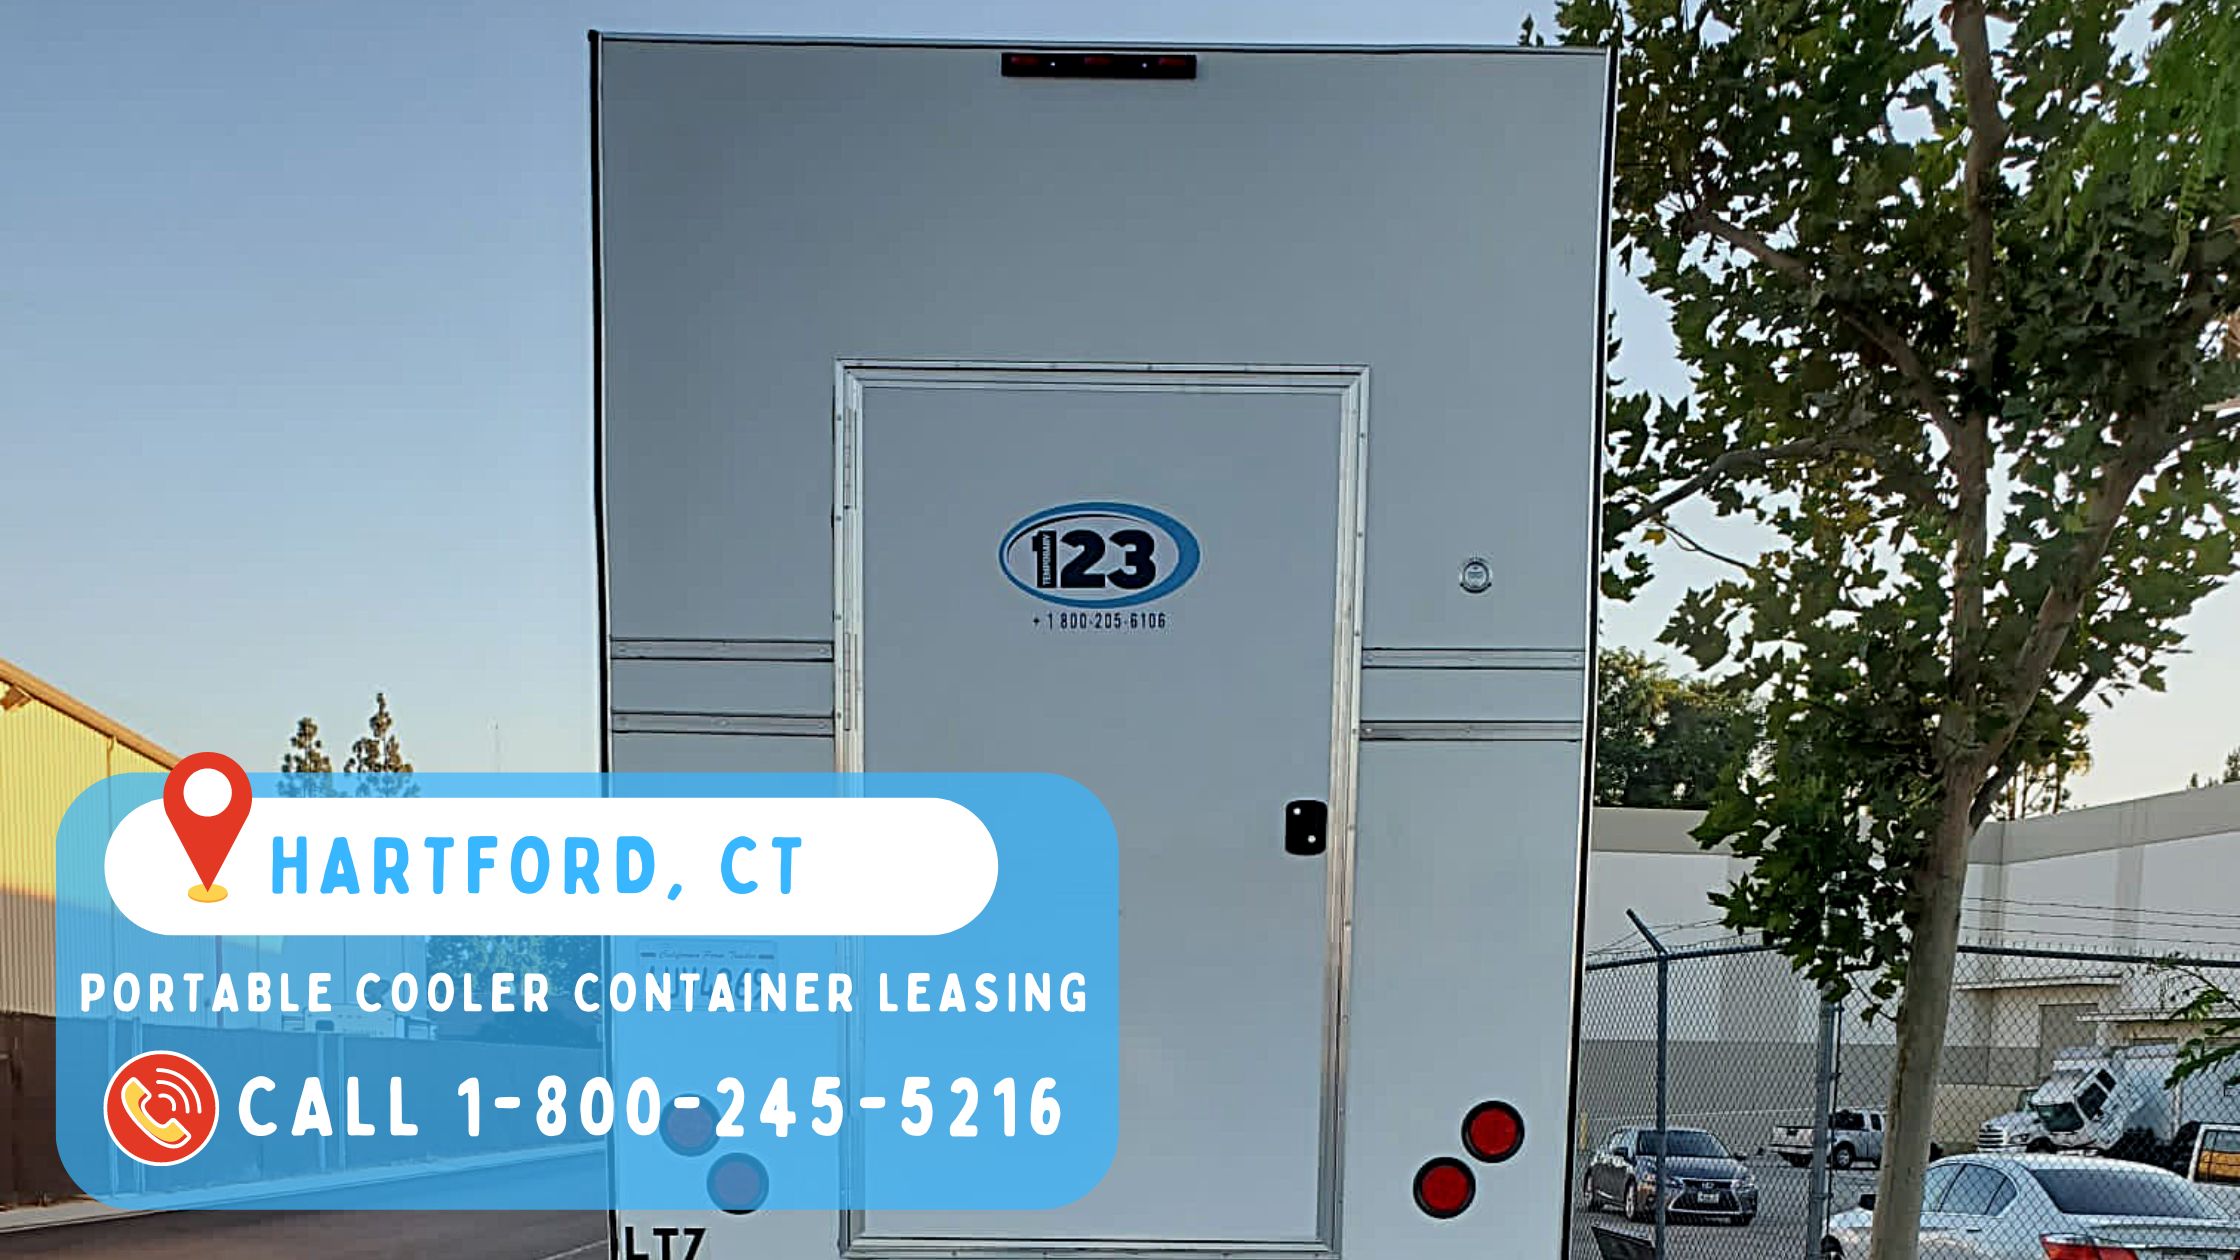 Portable Cooler Container Leasing in Hartford